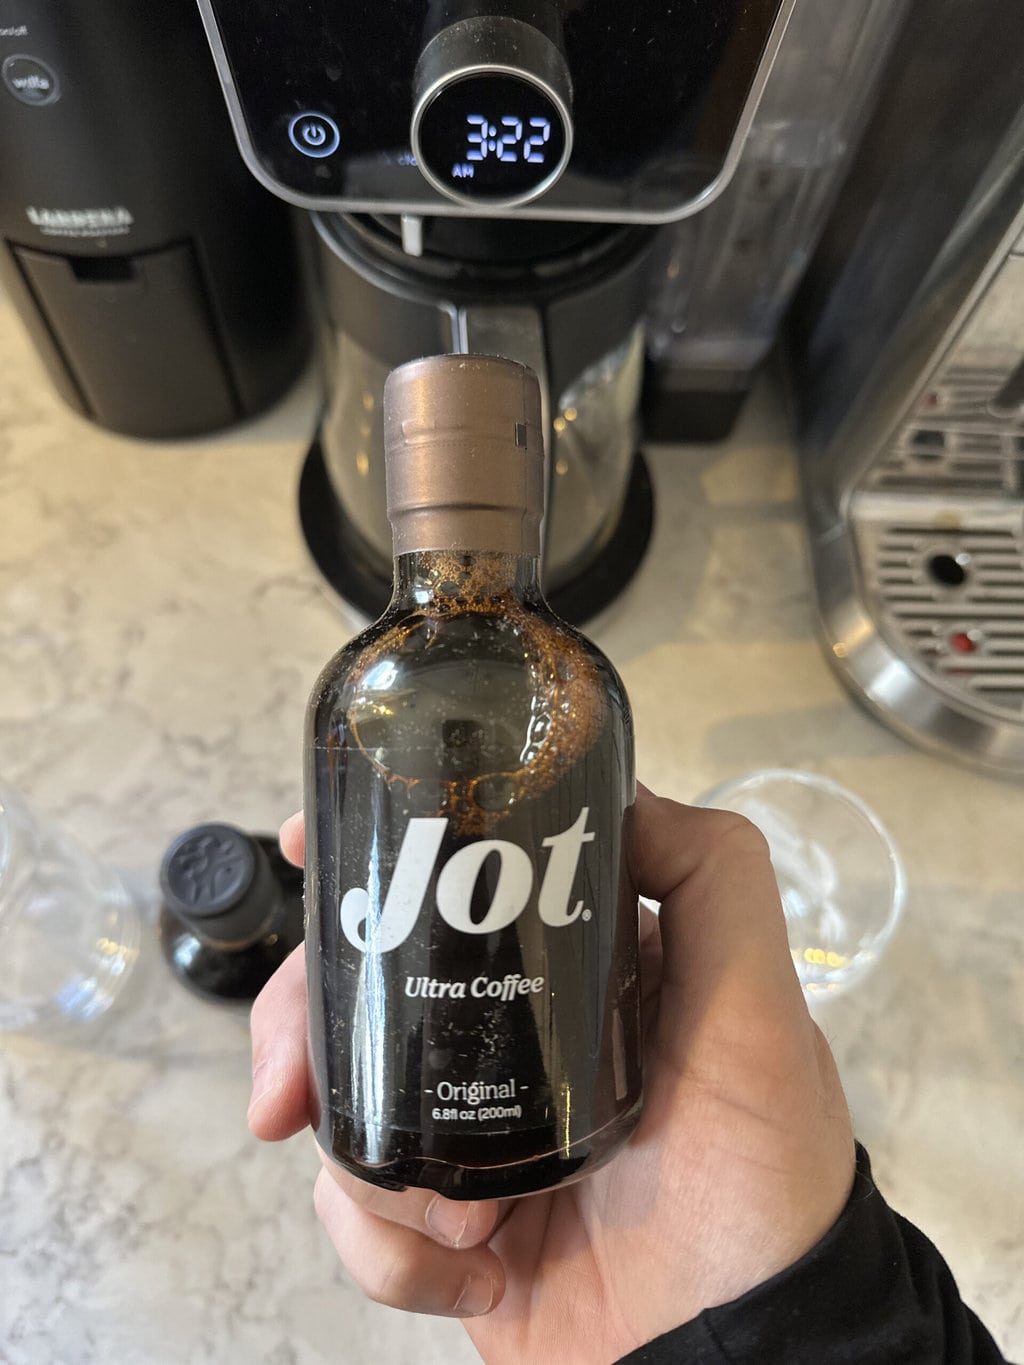 Jot Ultra Coffee in hand against the background of the coffee maker 